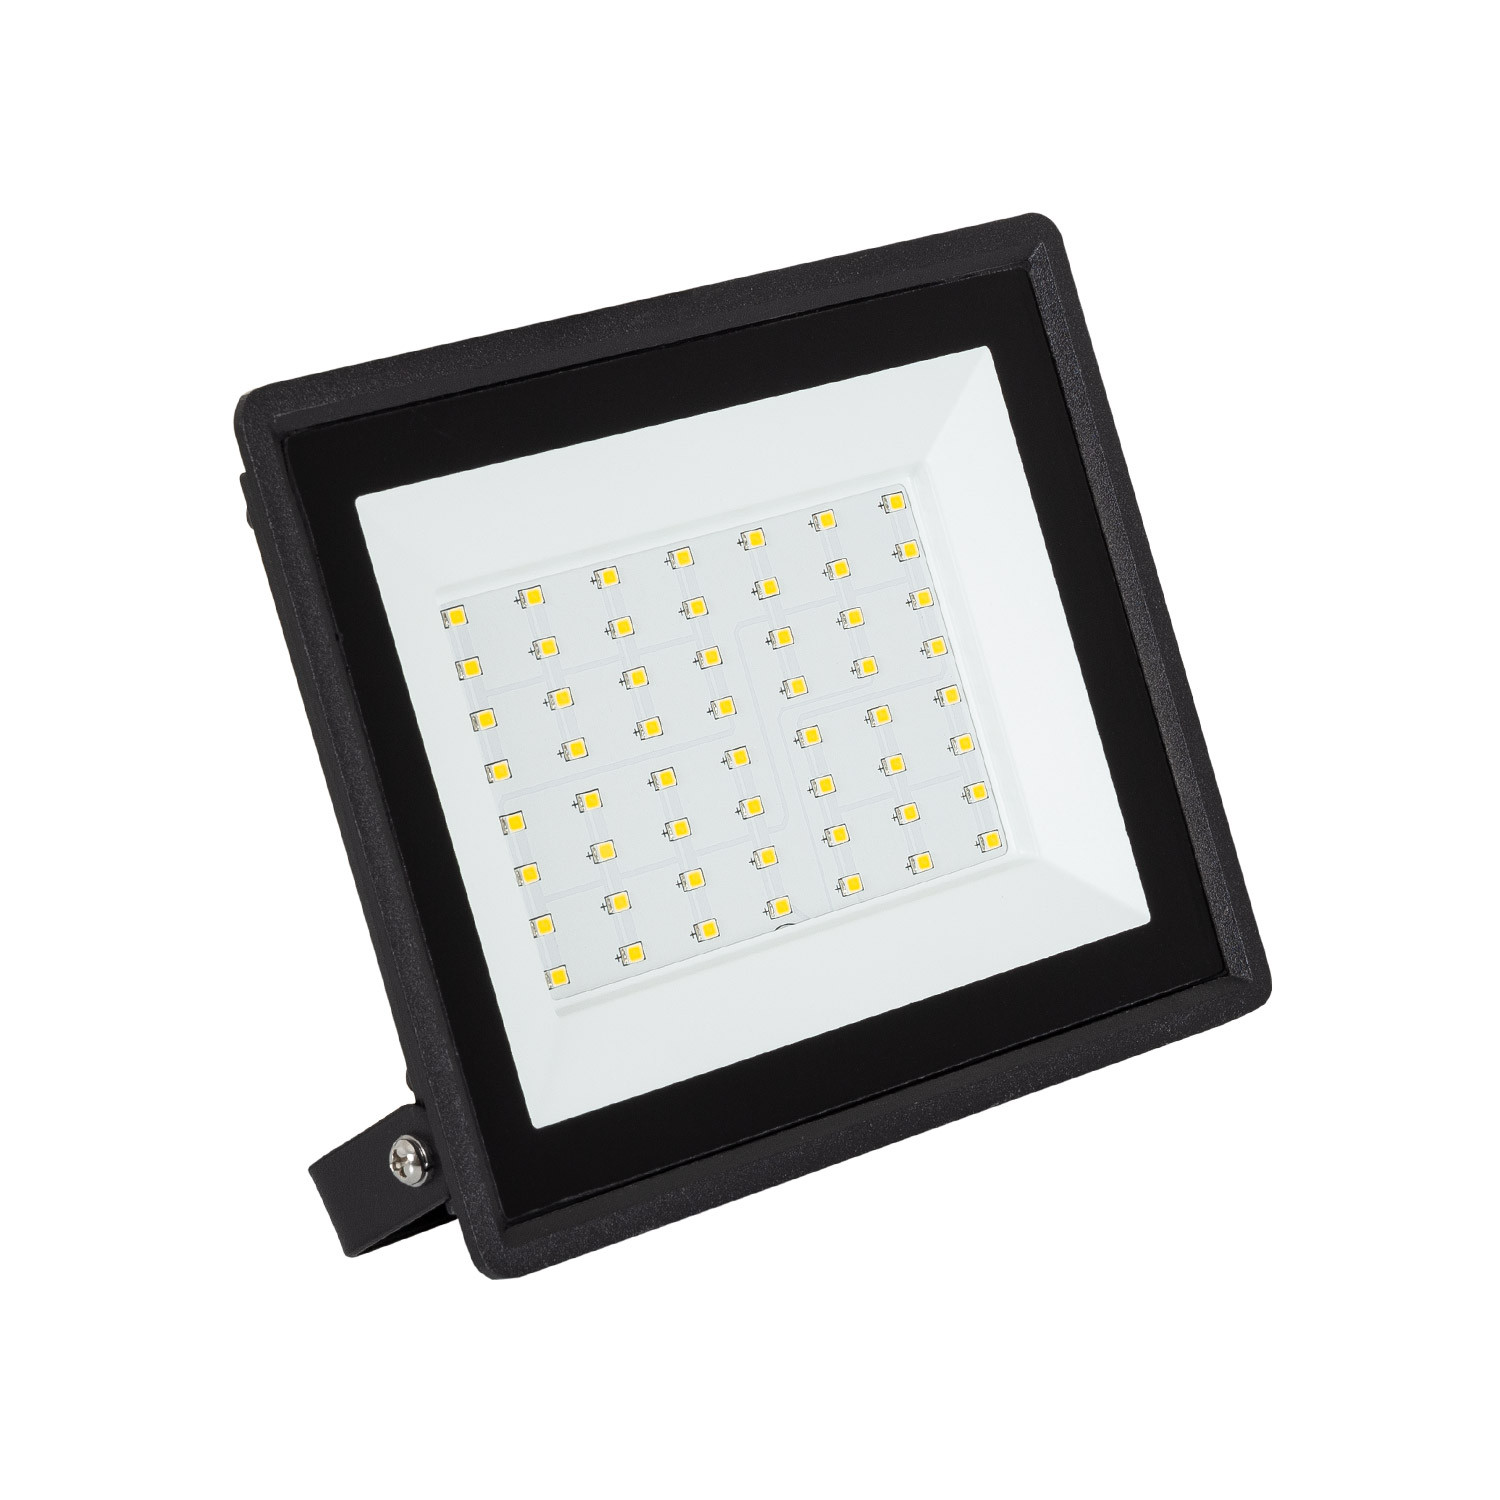 indebære Arrowhead Udholde Proiettore LED 50W 110lm/W IP65 Solid - Ledkia